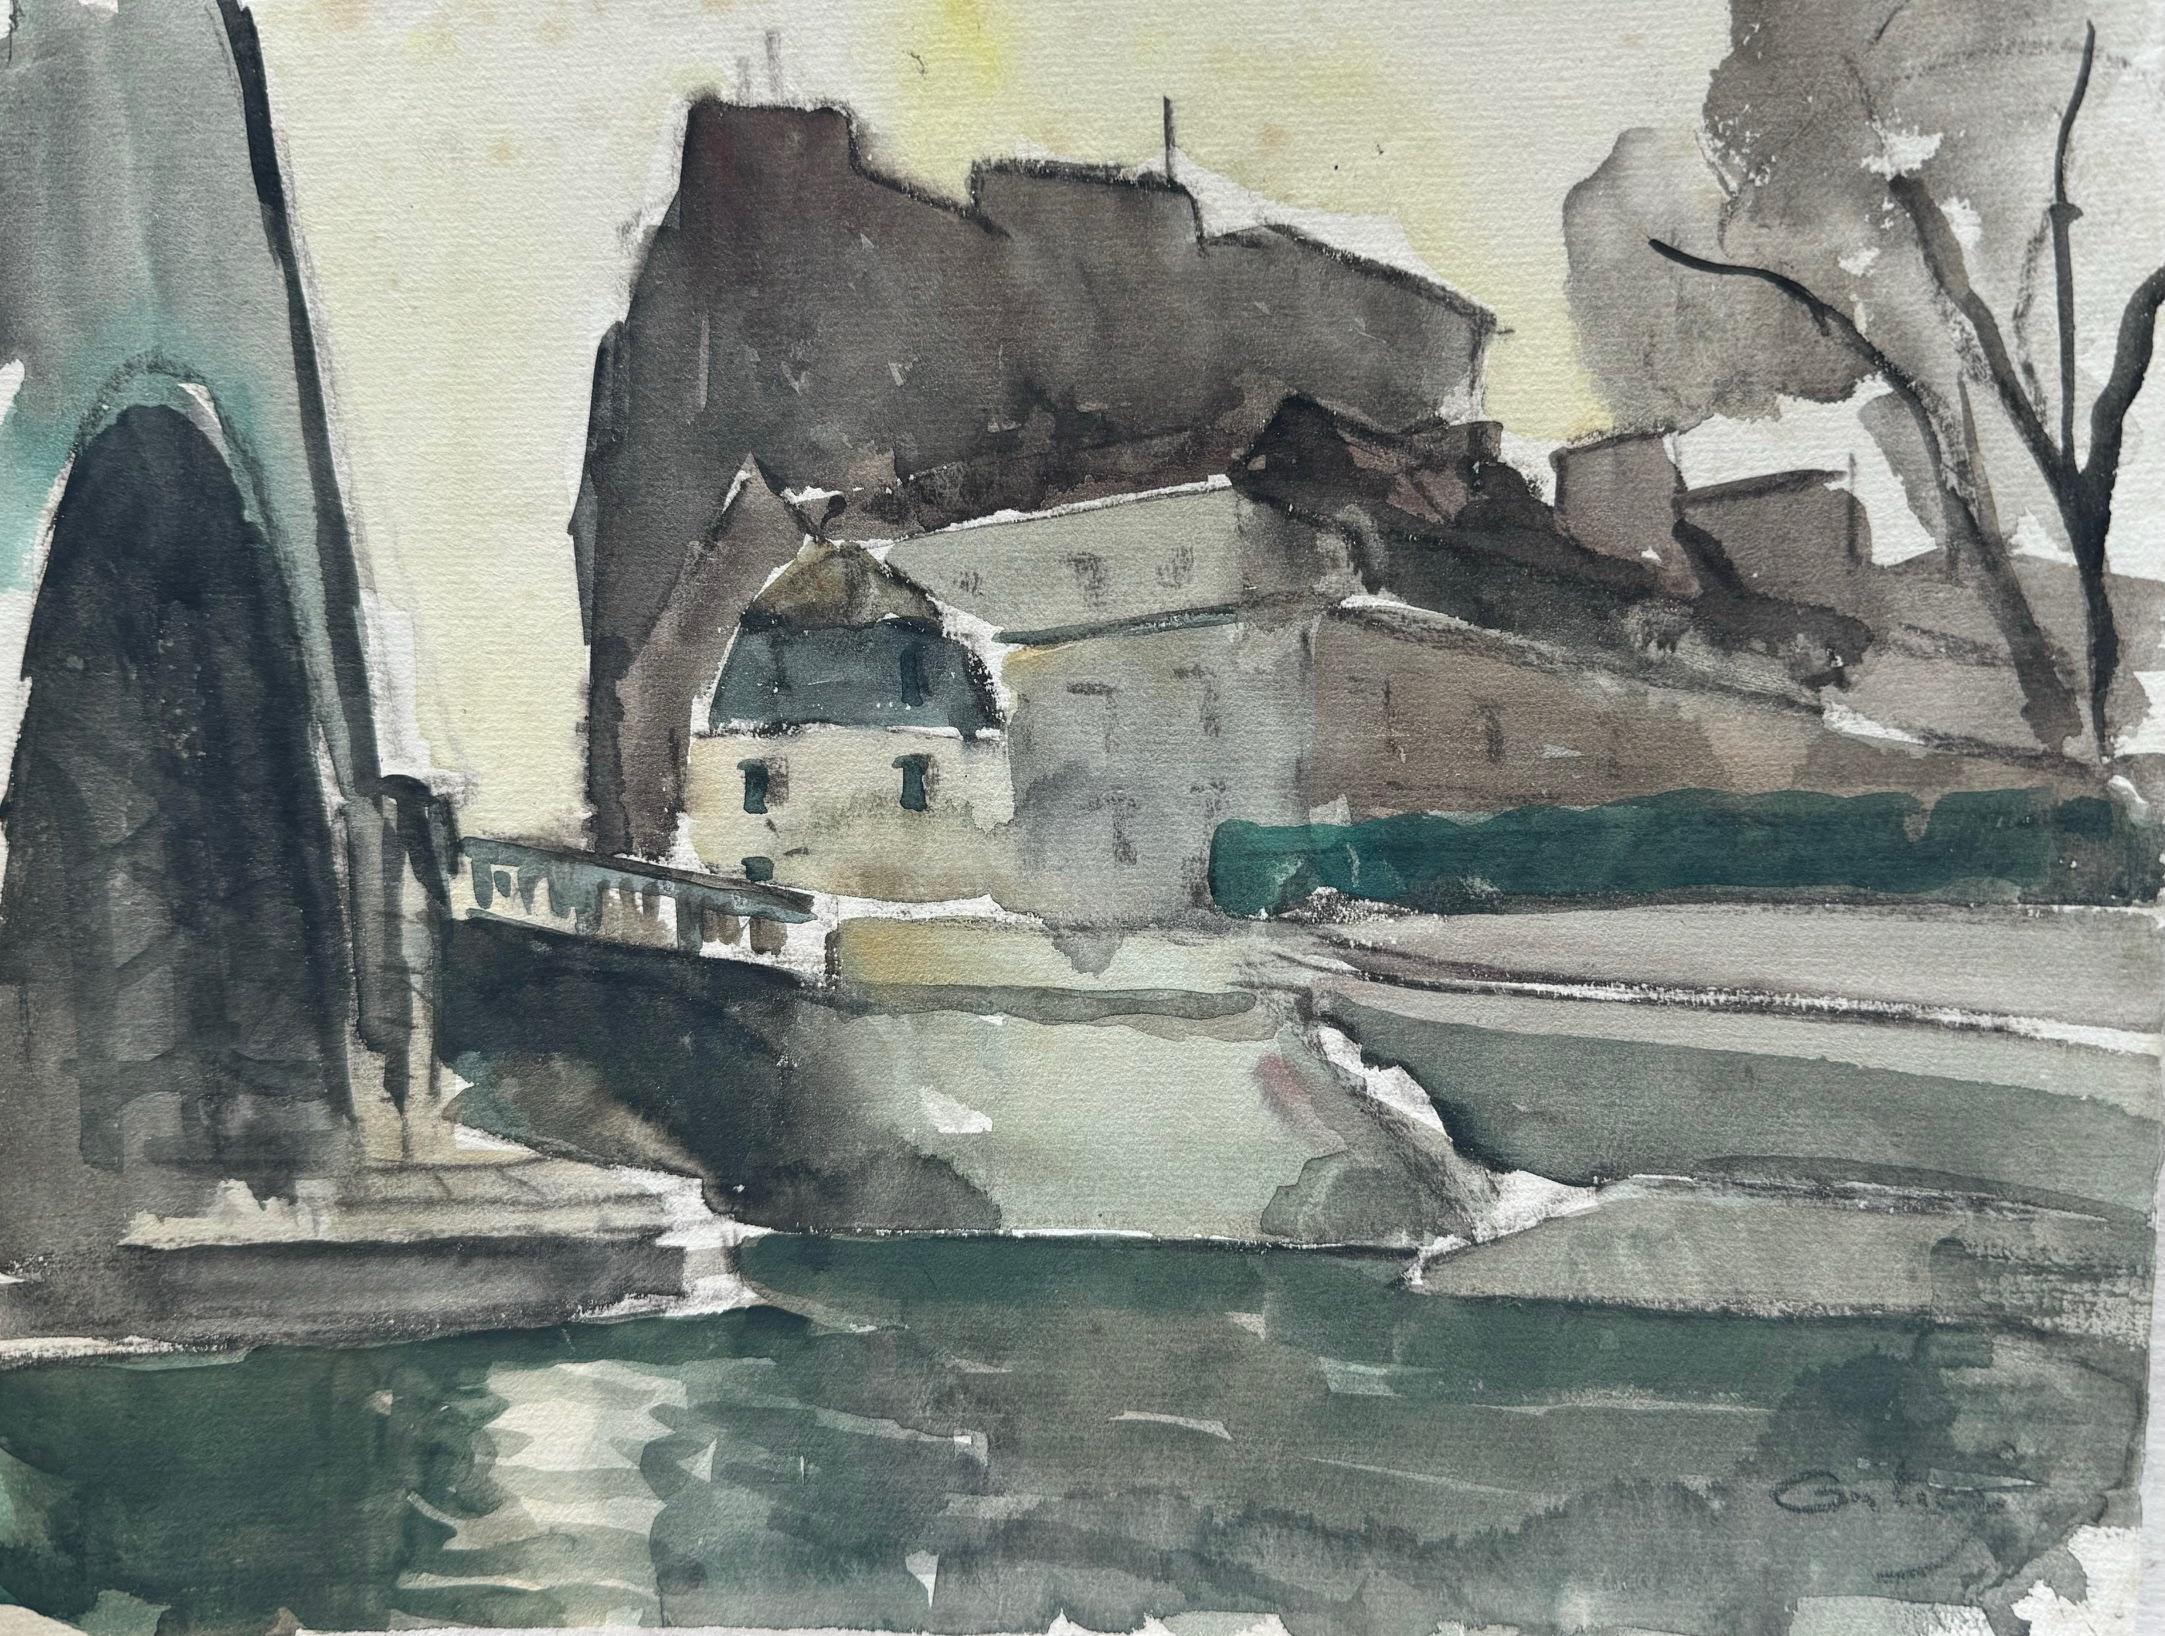 On The River, Mixed Media on Paper Colorful Paris City Scene